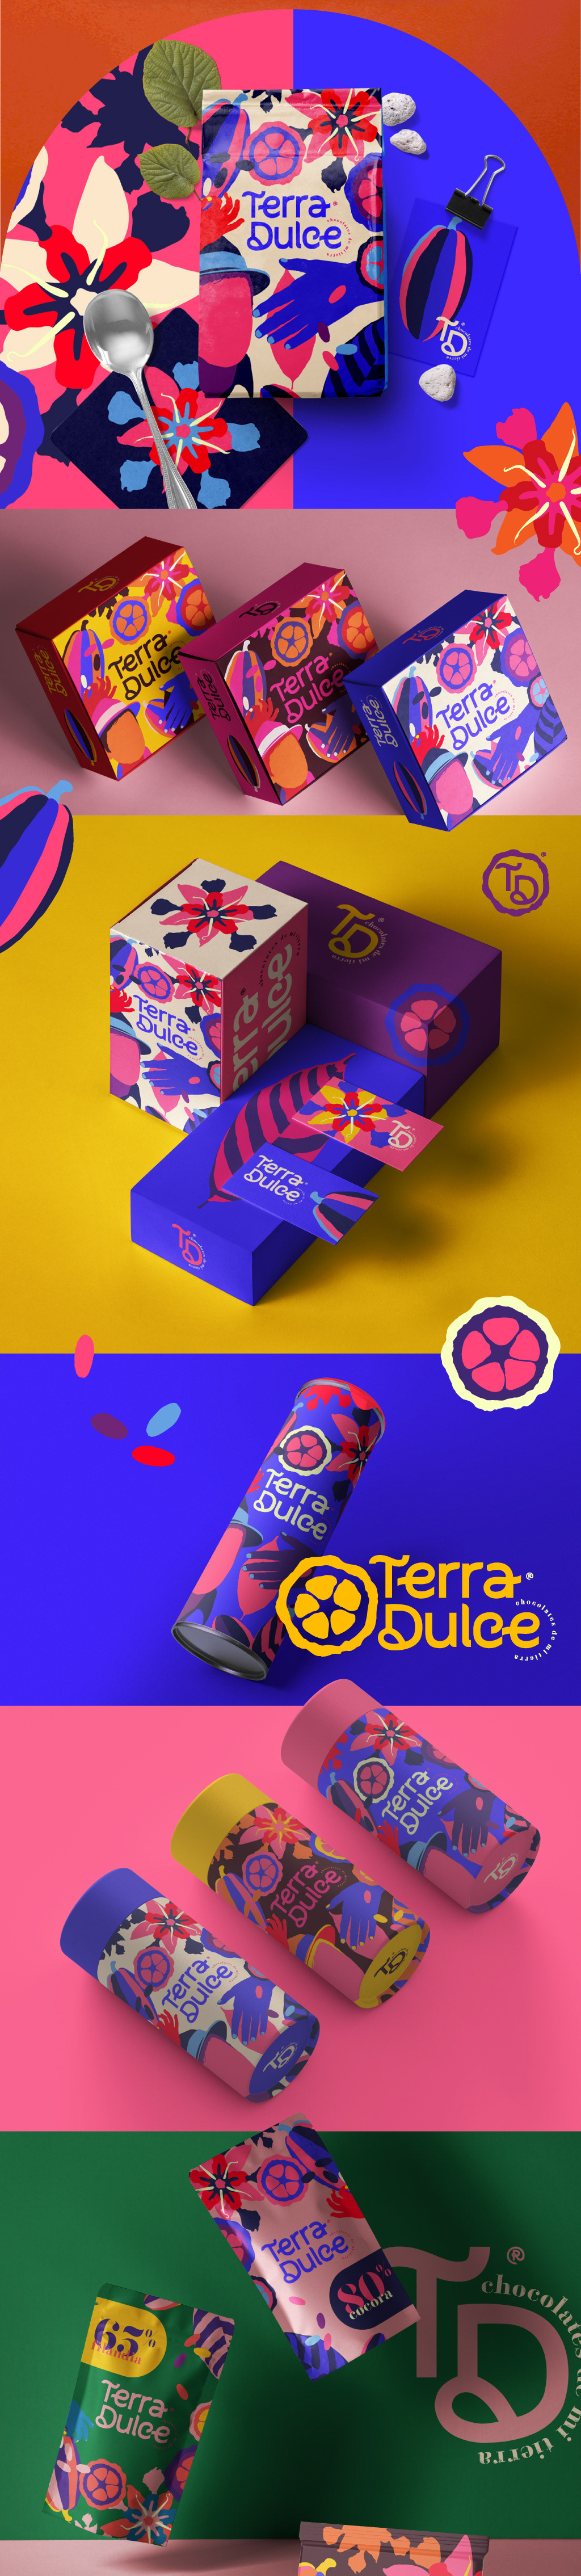 branding  brand marca logo packing chocolate Cocoa cacao